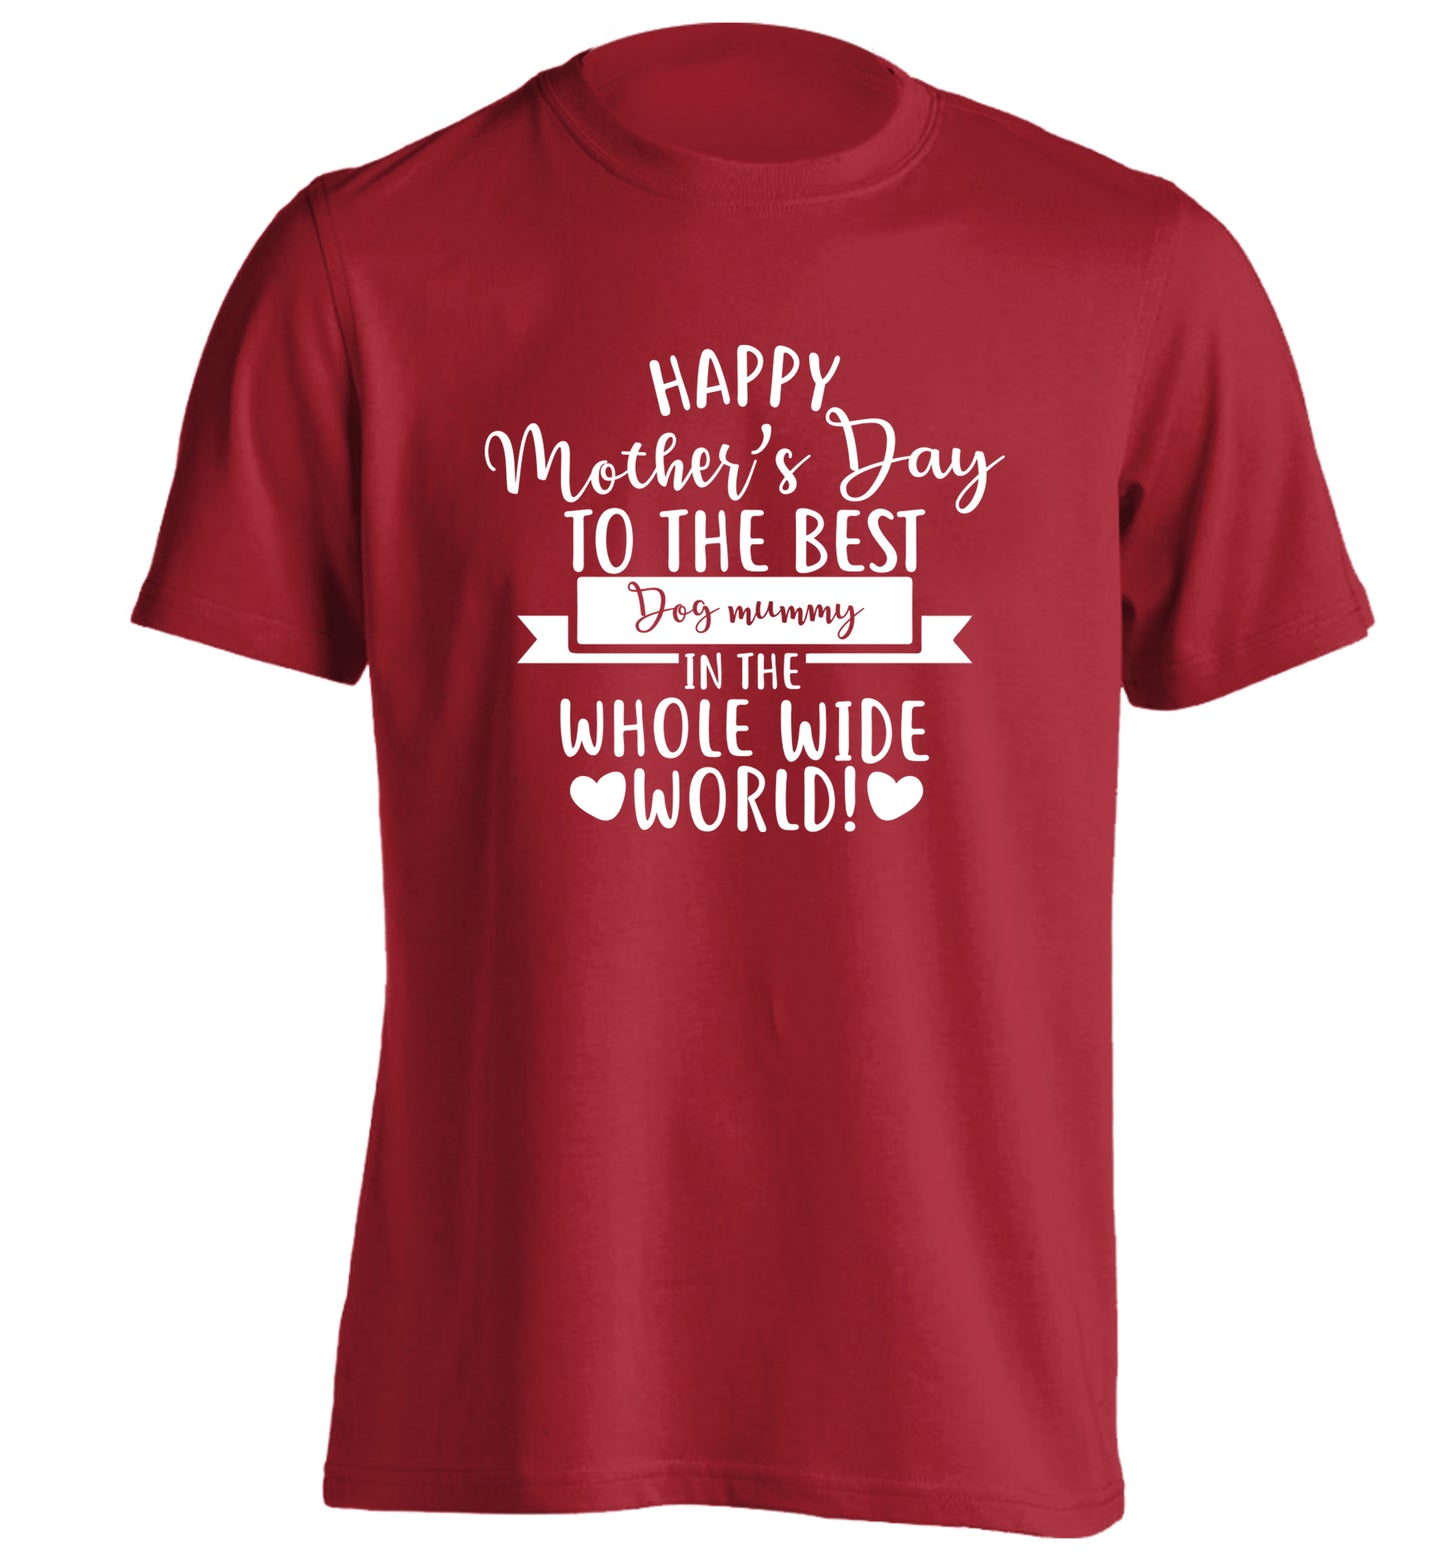 Happy mother's day to the best dog mummy in the world adults unisex red Tshirt 2XL